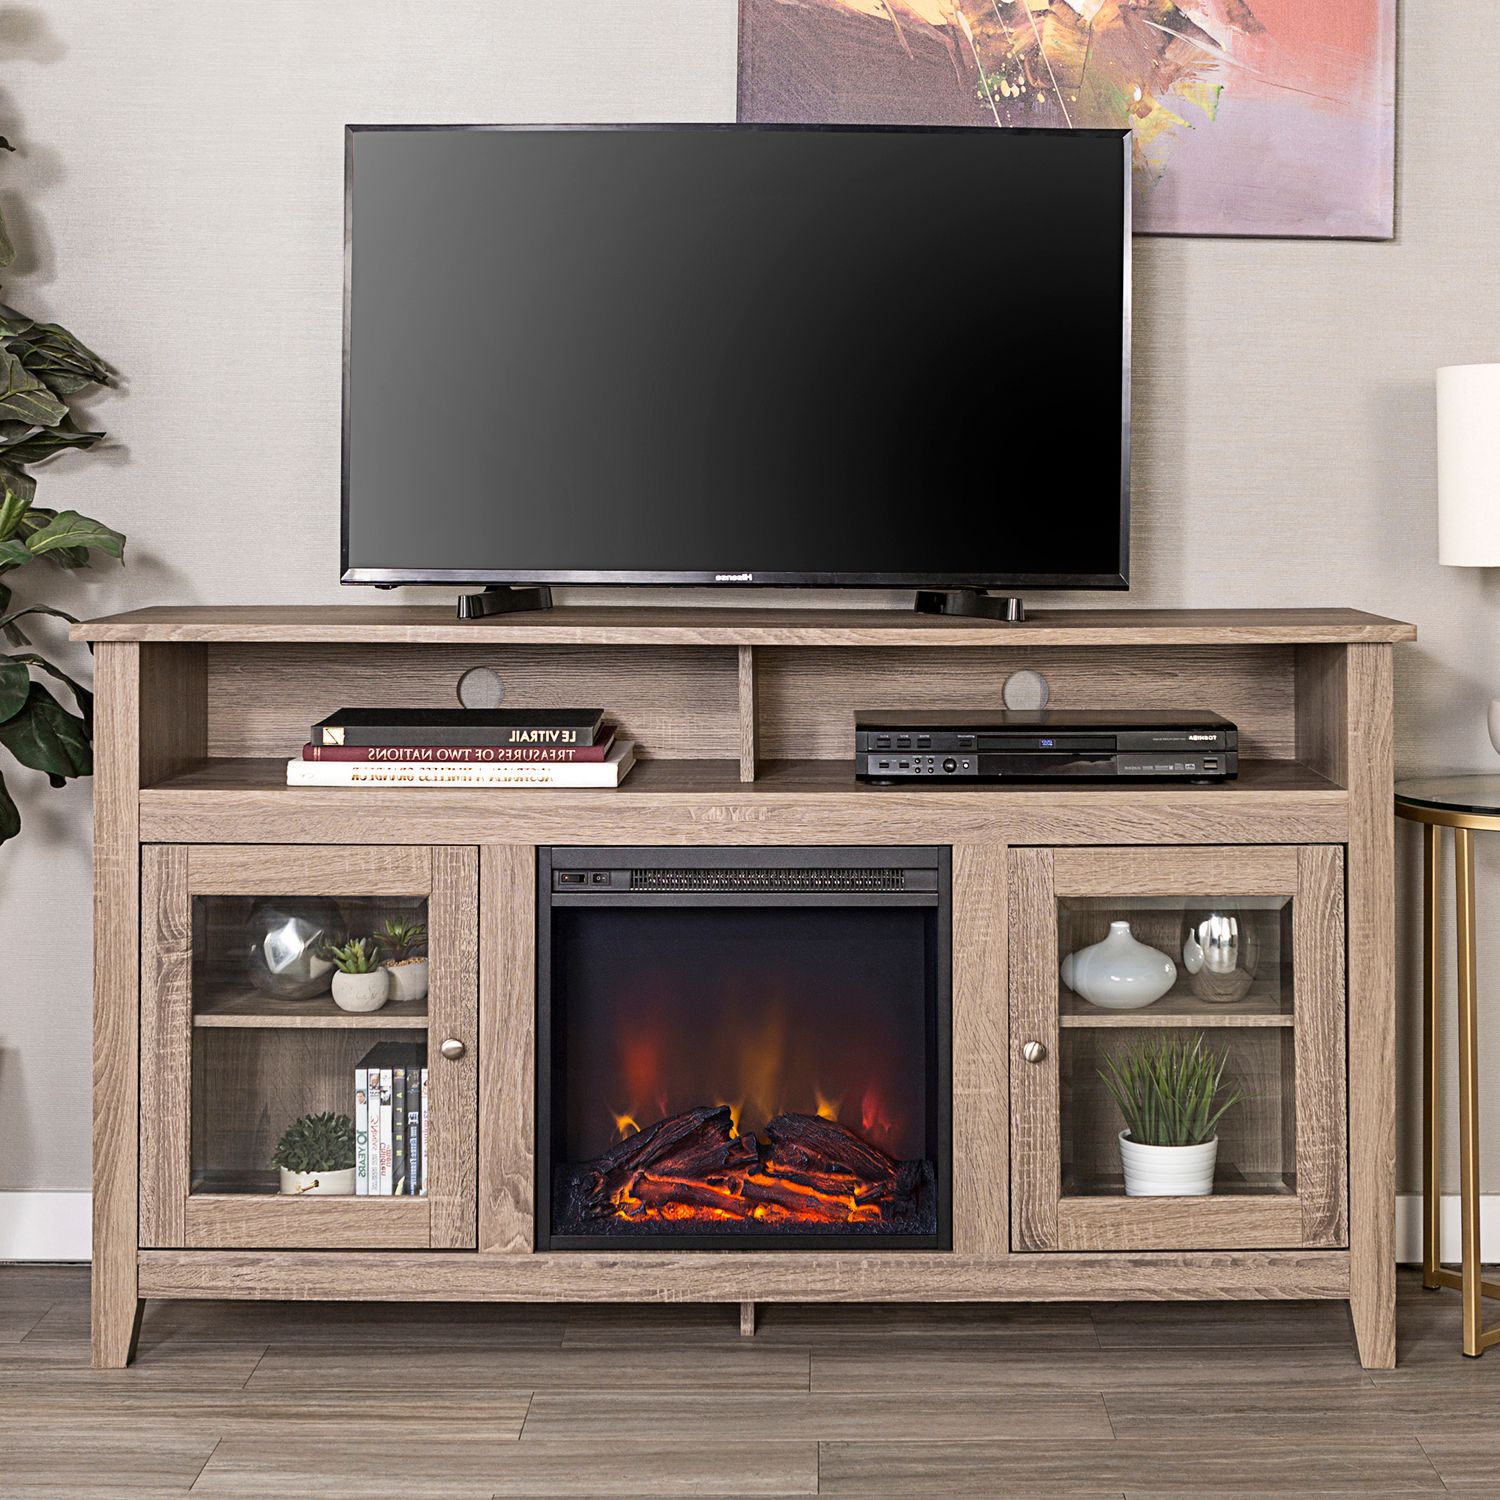 Wood Highboy Fireplace Tv Stands With Favorite Highboy Wood Fireplace Tv Stand – Pier (View 13 of 15)